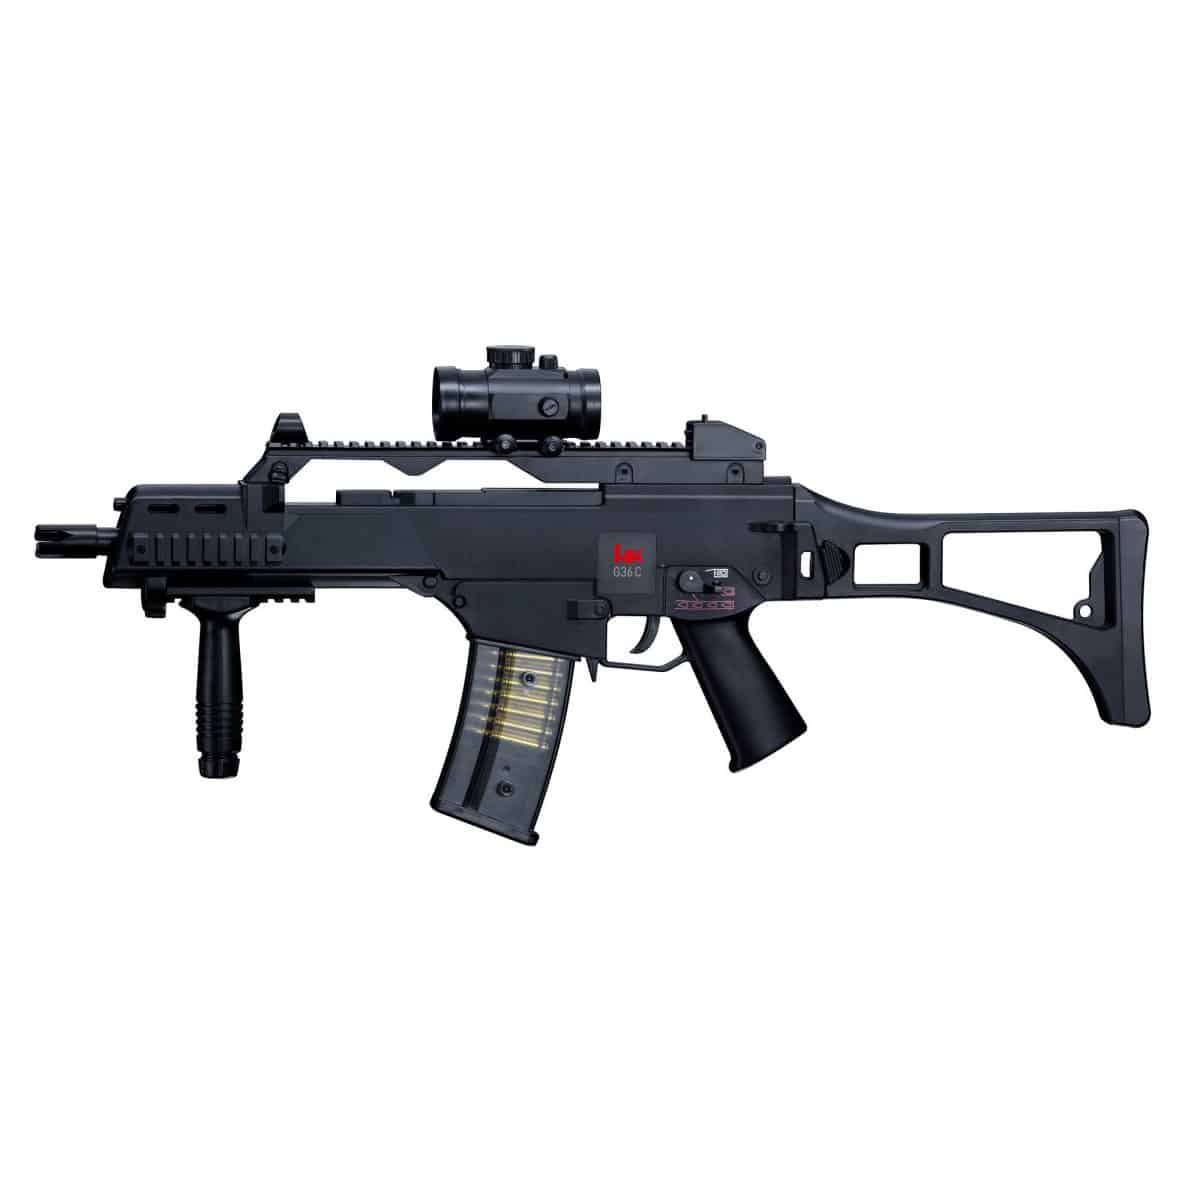 Pusca electrica Airsoft G36 C Heckler & Koch 2.5621